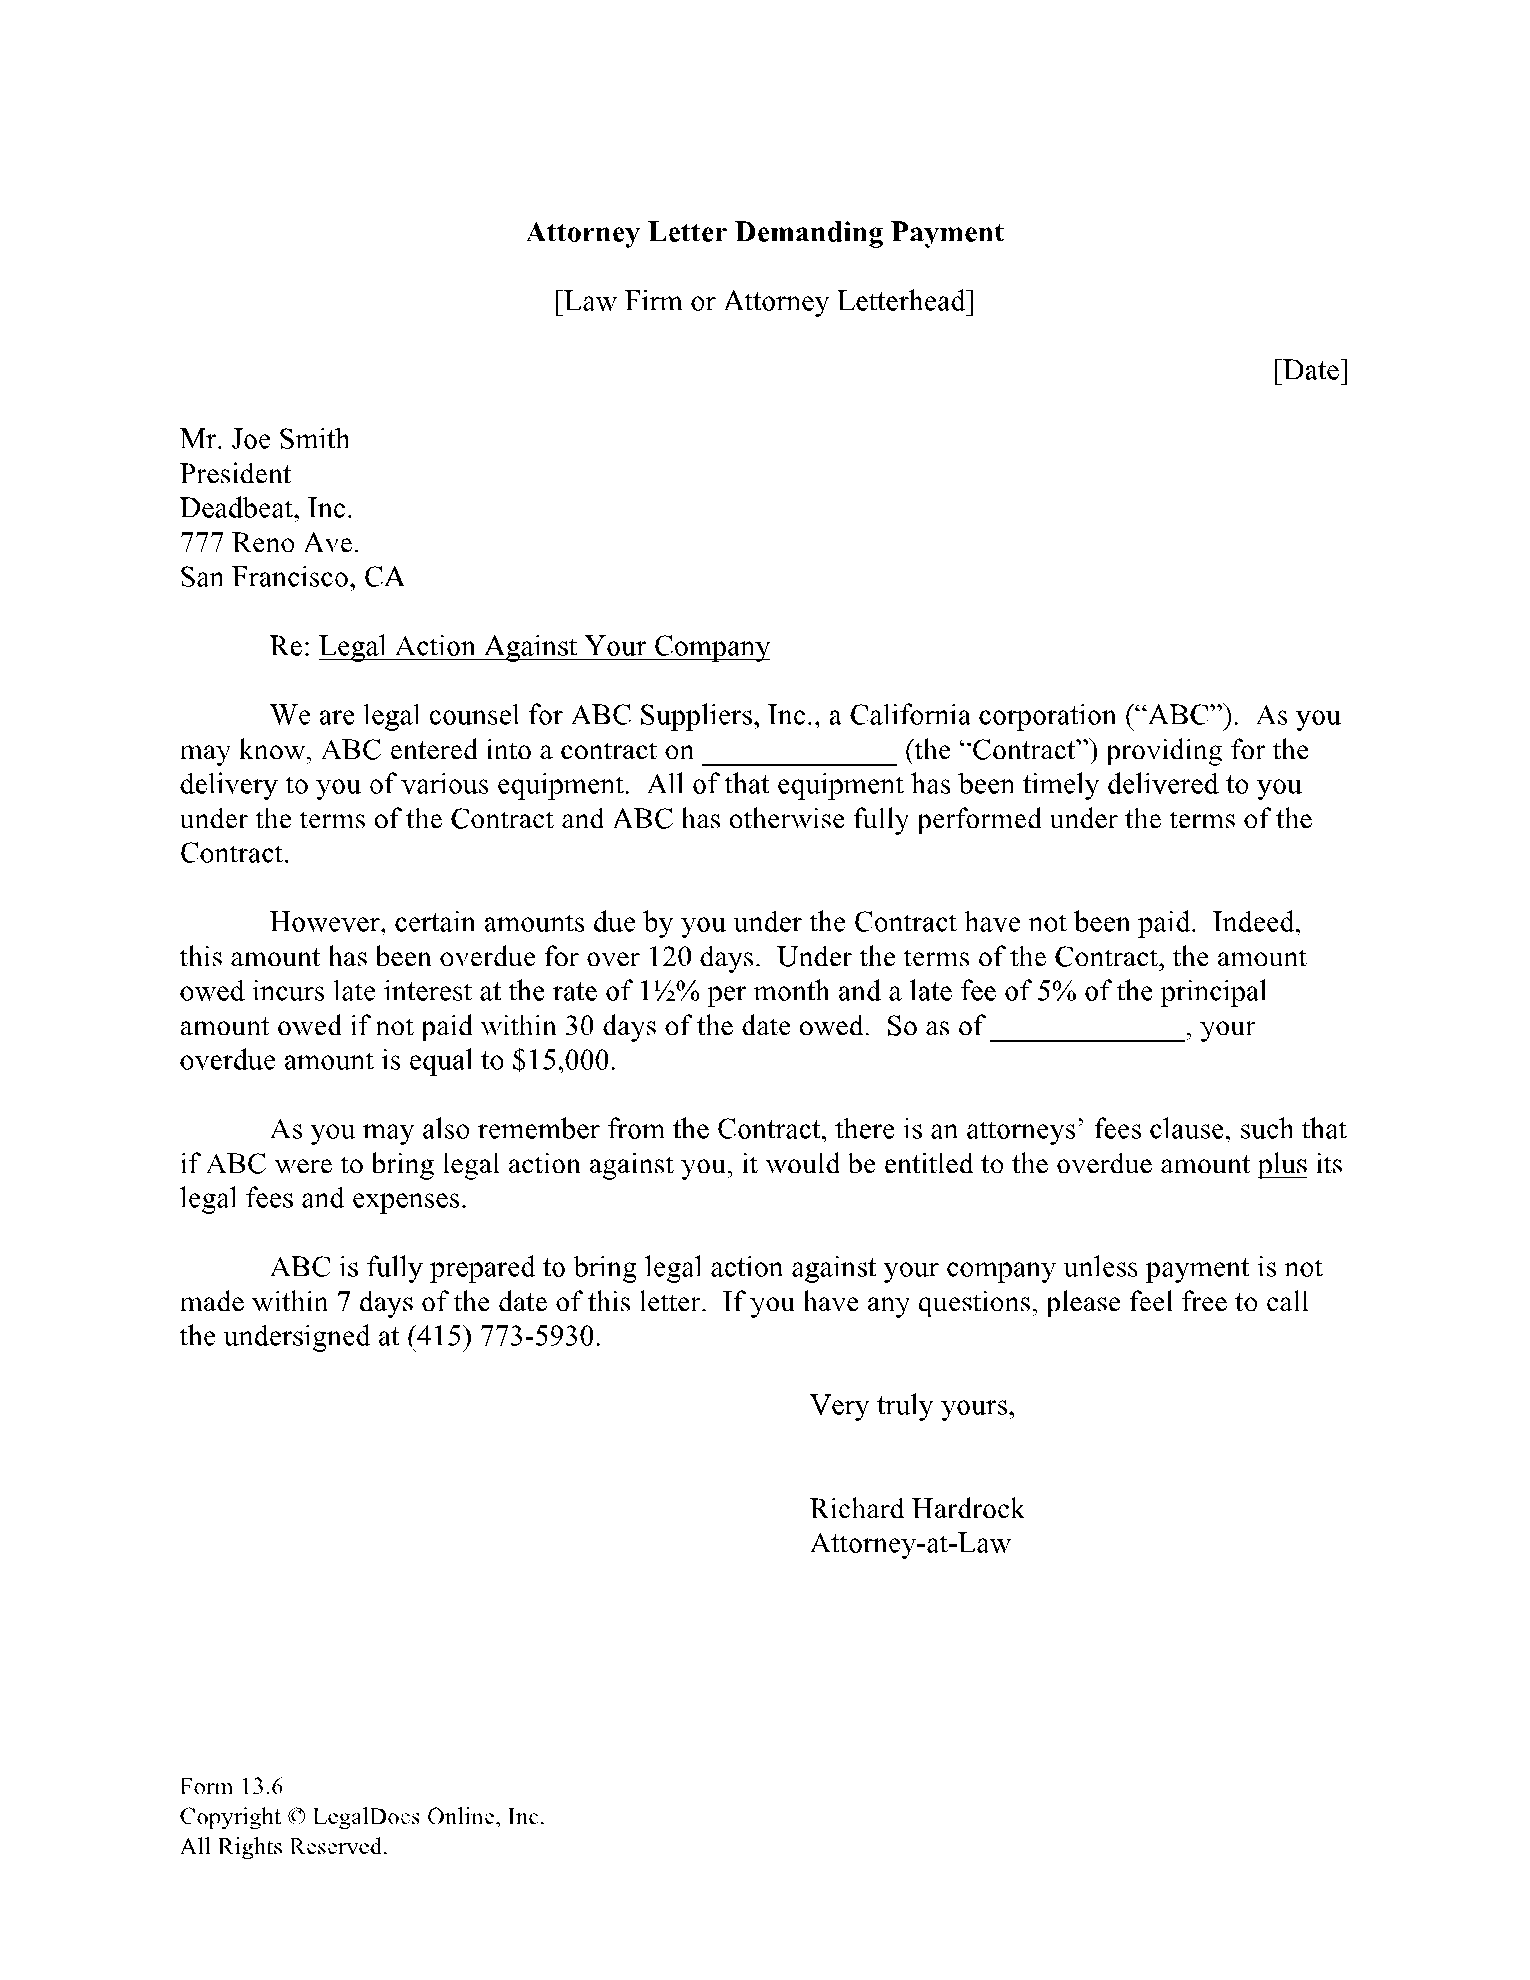 Demand Letter from Attorney 2